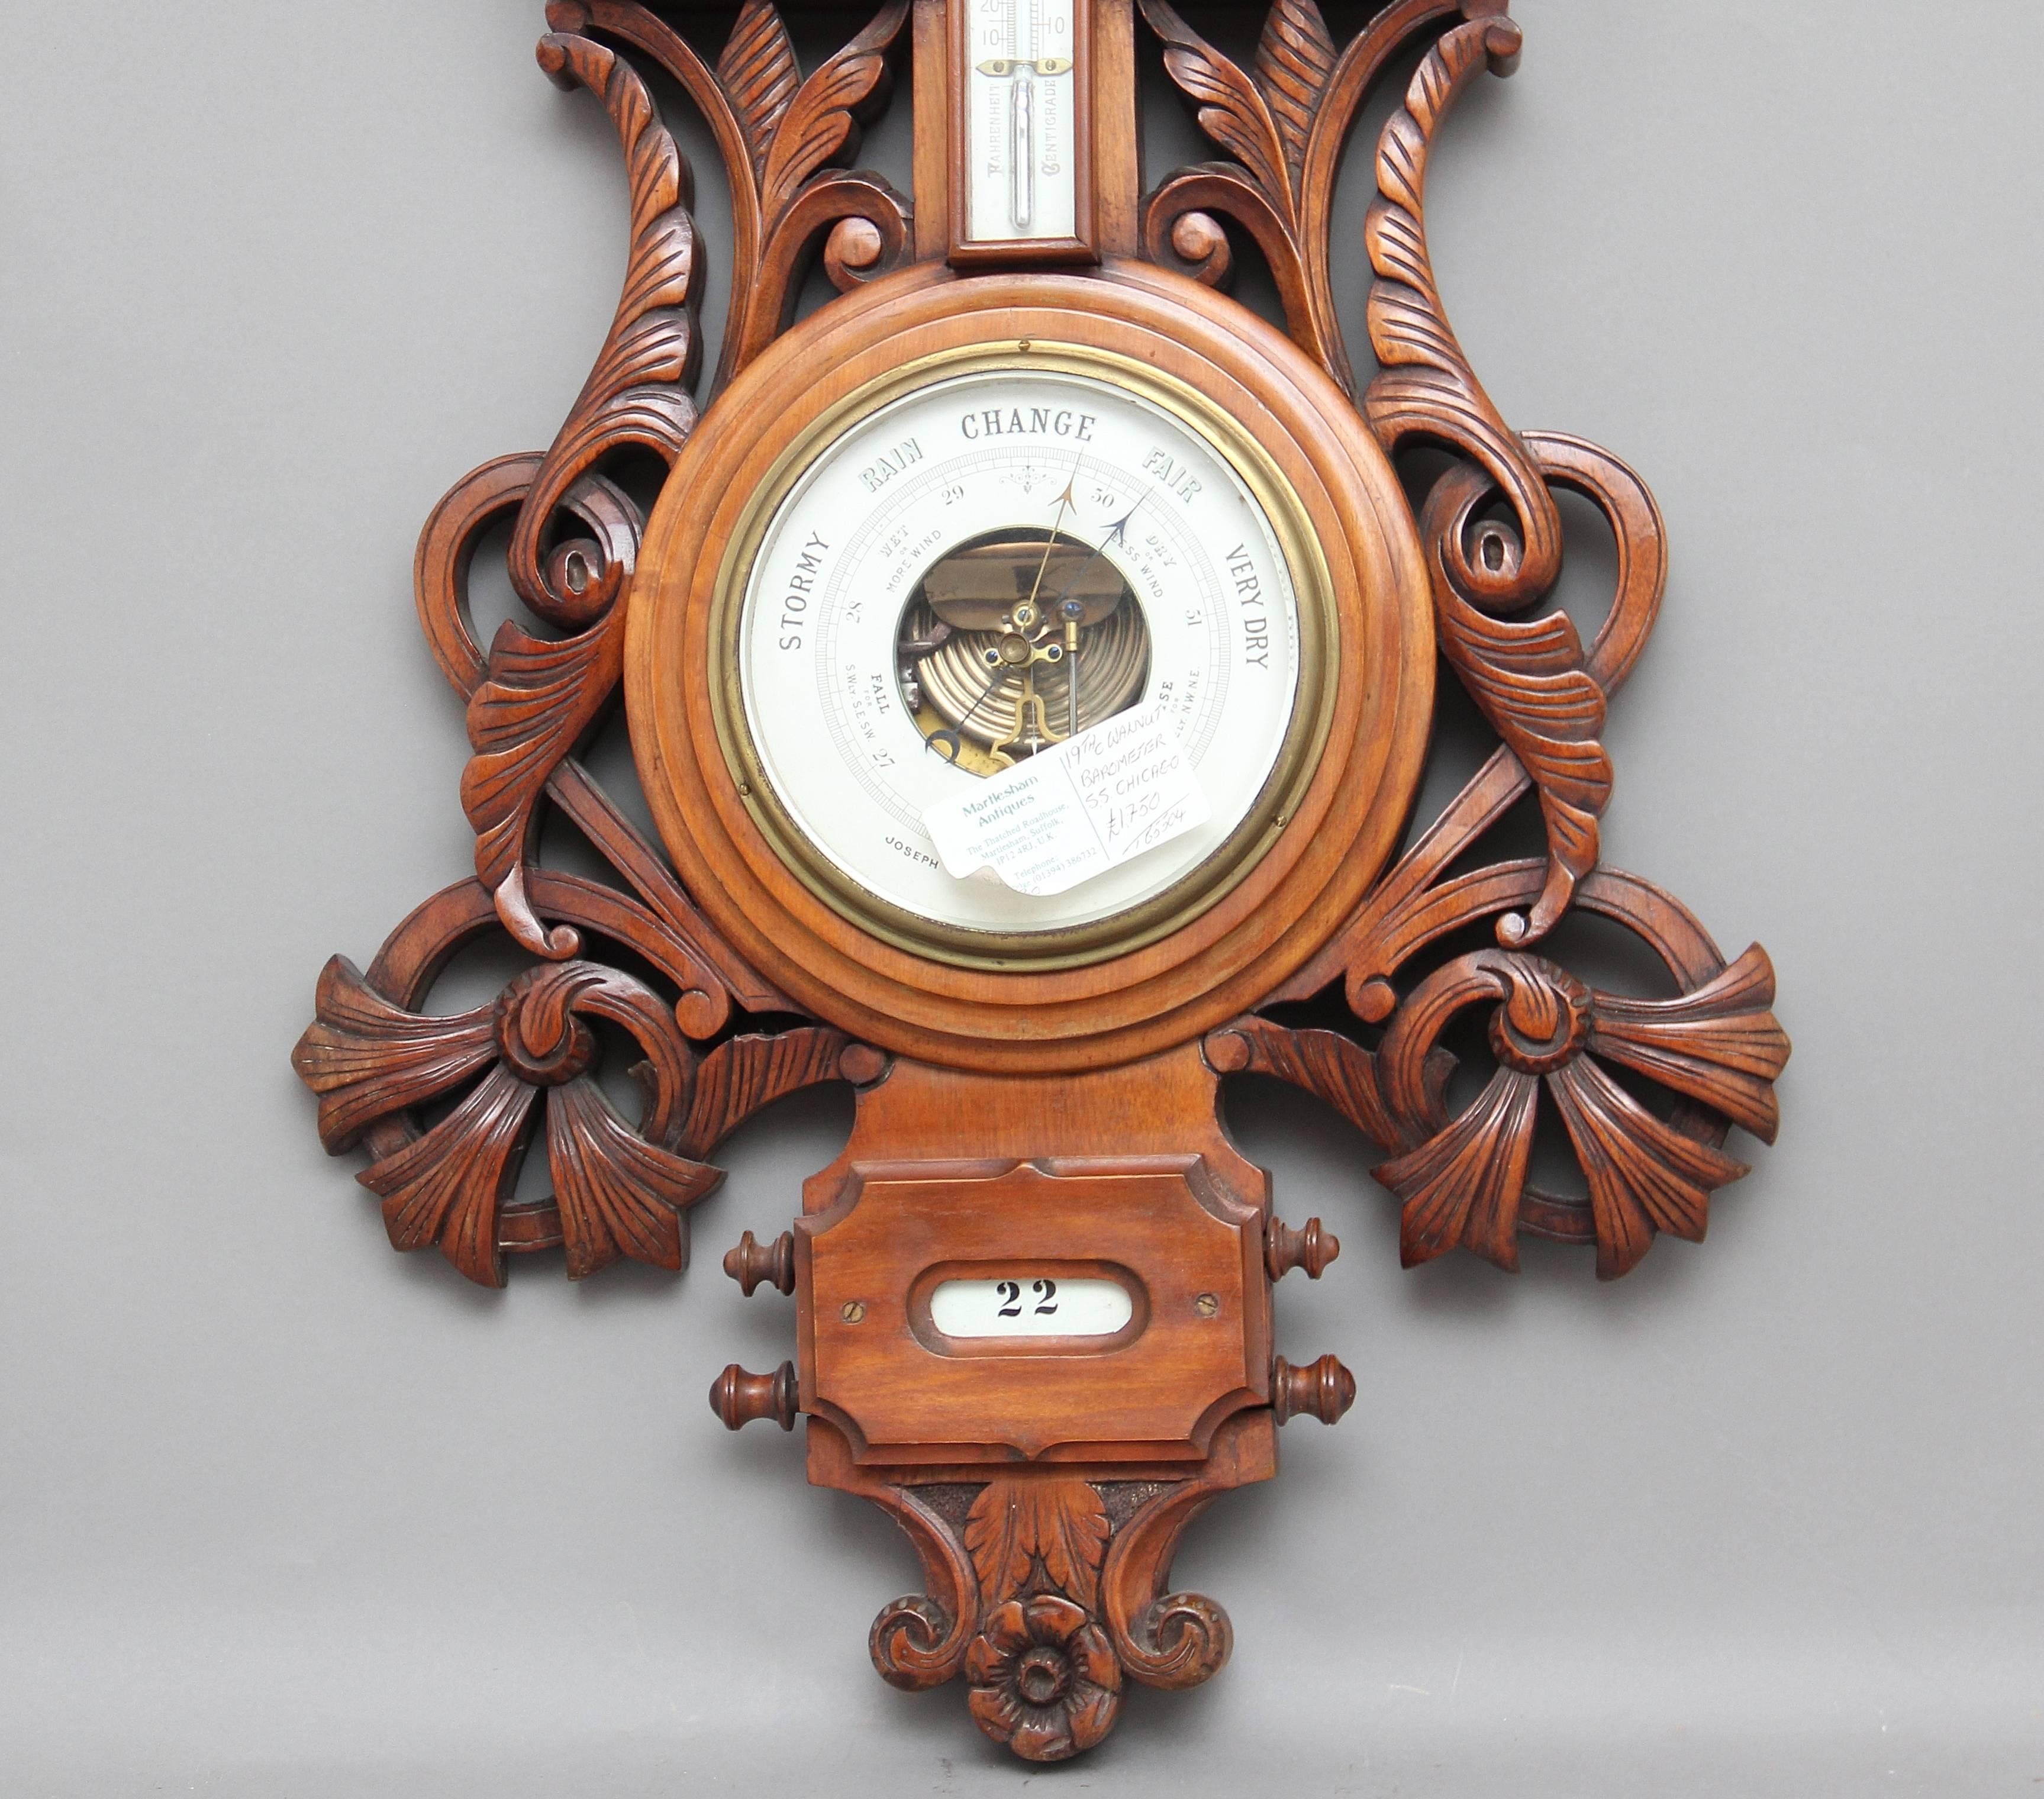 A lovely quality 19th century American carved walnut barometer, marked at the top with “SS city of Chicago, Inman steam ship Company” not only working as a barometer but also including a thermometer, clock and compartments showing the day, date and